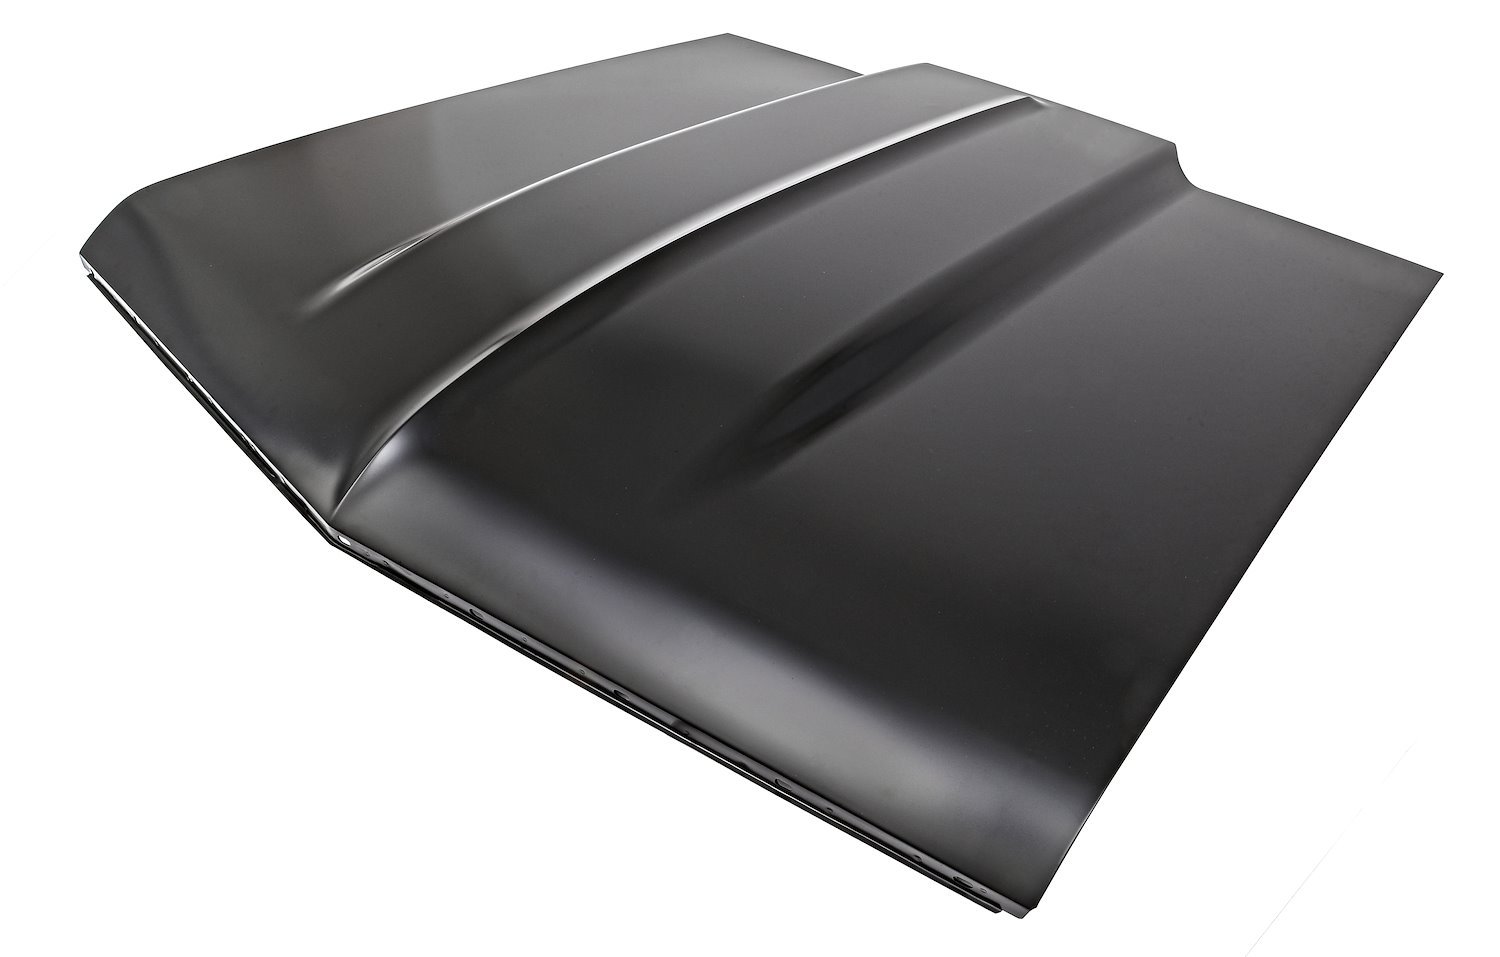 Steel Cowl Induction Hood for 1967 Chevrolet Chevelle & El Camino [2 in. Cowl Induction Scoop]